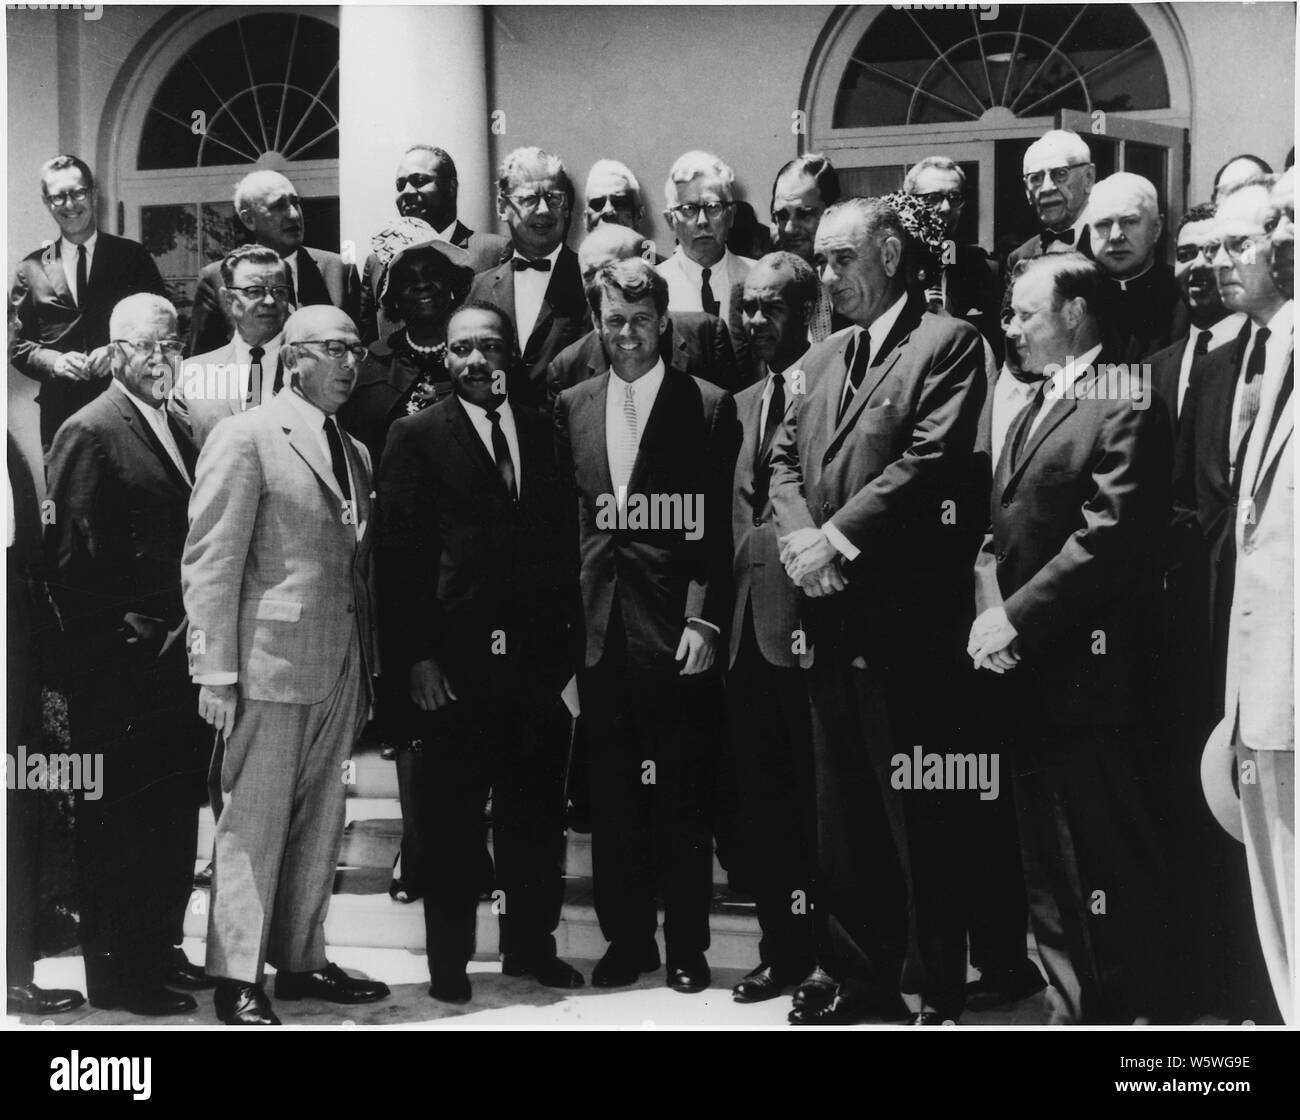 Photograph of White House Meeting with Civil Rights Leaders. June 22, 1963; Scope and content:  Photograph of meeting with Civil Rights leaders. Front Row: Martin Luther King, Jr., Robert F. Kennedy, Roy Wilkins, Lyndon Baines Johnson, Walter P. Reuther, Whitney M. Young, A Philip Randolph Second Row: Second From Left Rosa Gragg Top Row Third From Left James Farmer Stock Photo